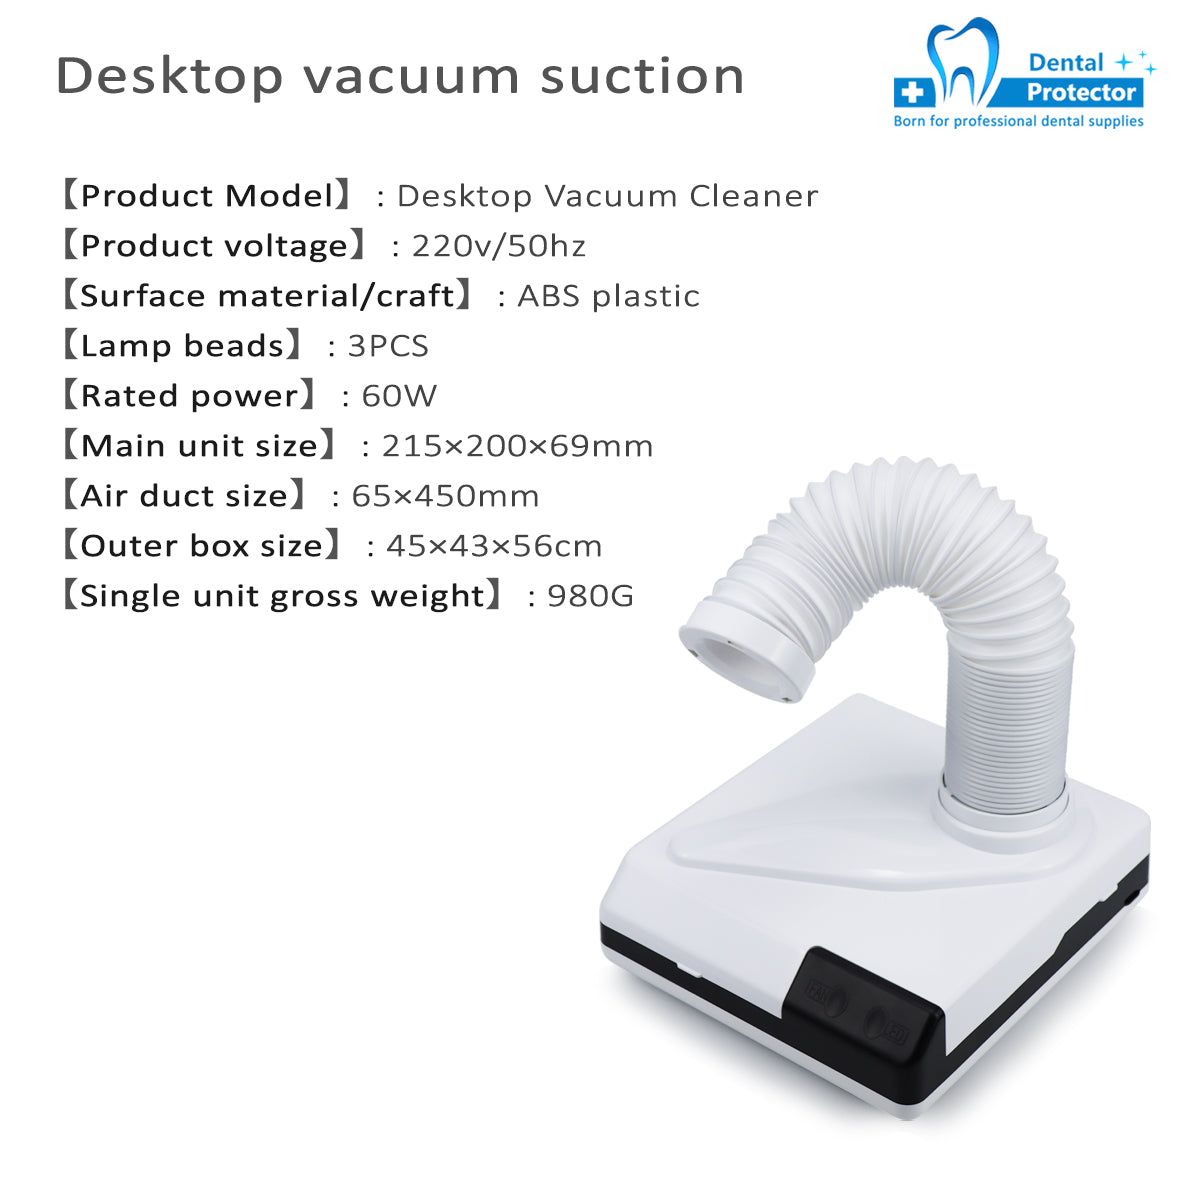 Small Mini New Dental Mirco Motor Vacuum Cleaner Strong Suction Low Nioce Silent Portable Dental Suction Machine Unit